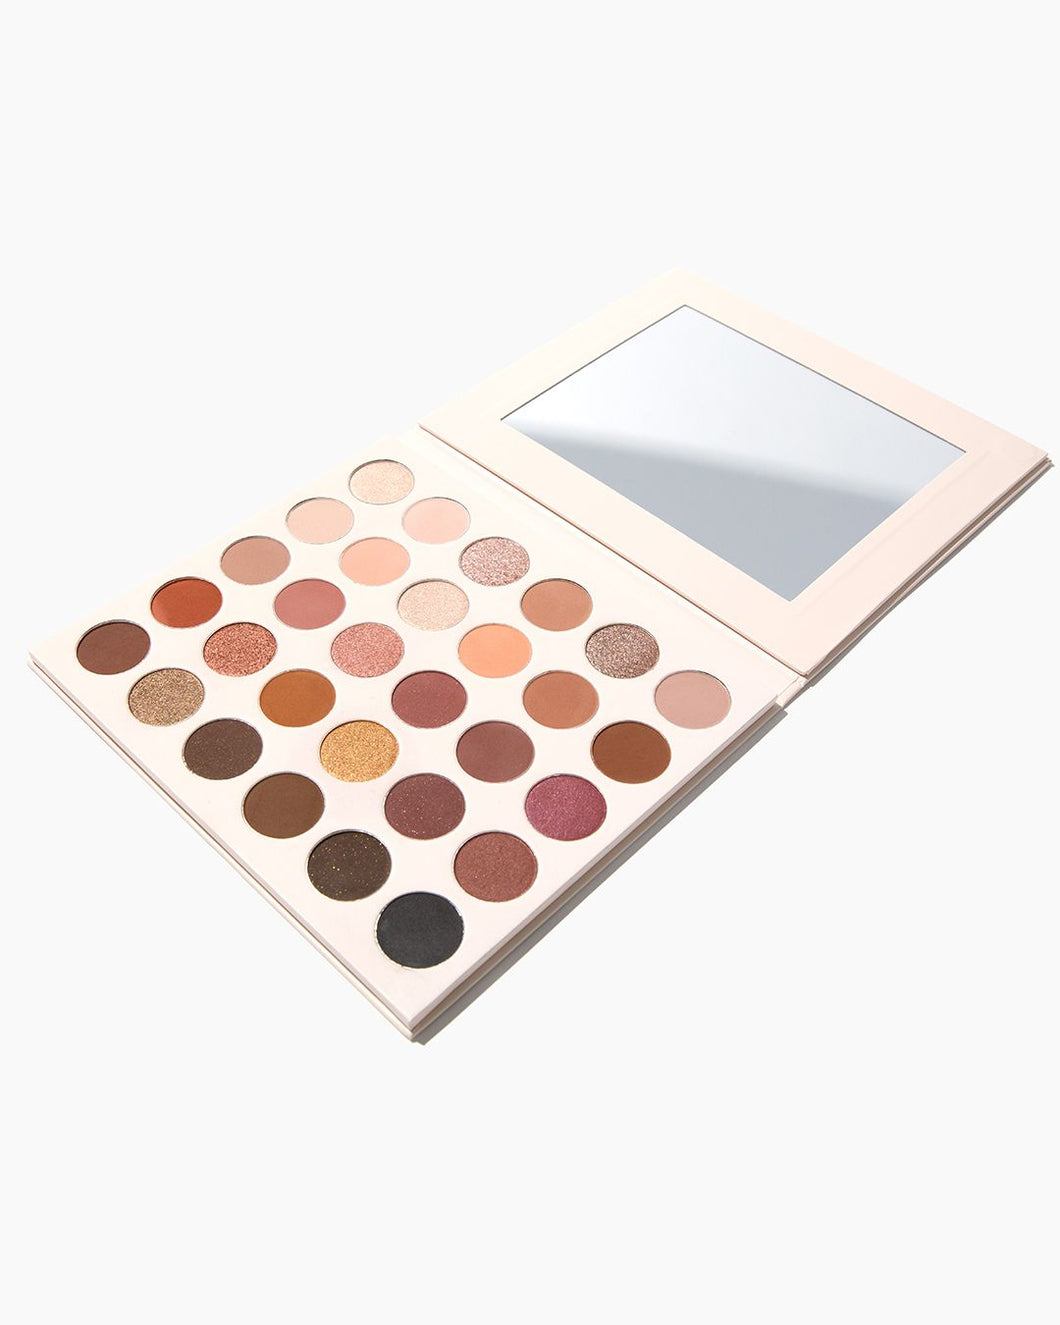 THE NUDES COLLECTION PALETTE